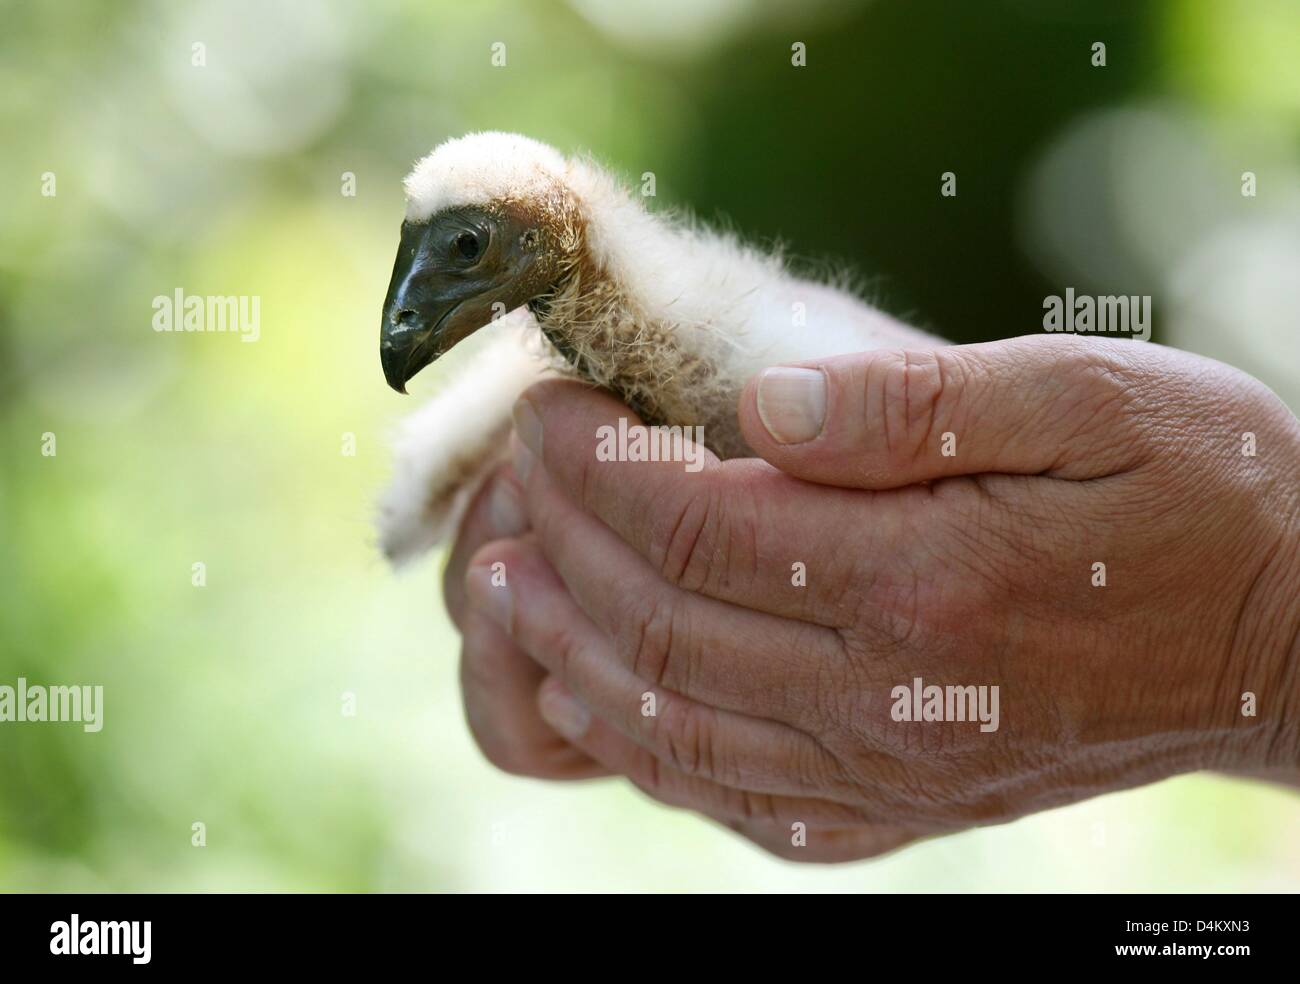 A young turkey buzzard sits in the hands of the zoo director of the Westkuestenpark (lit. West Coast Park) in St. Peter-Ording, Germany, 26 May 2009. The chick is one week old and will be raised by humans. Turkey buzzards eat all kinds of waste, such as dead animals or rotten food. The name of the turkey buzzard derives from the resemblance of grown animals to turkeys. Photo: CARST Stock Photo